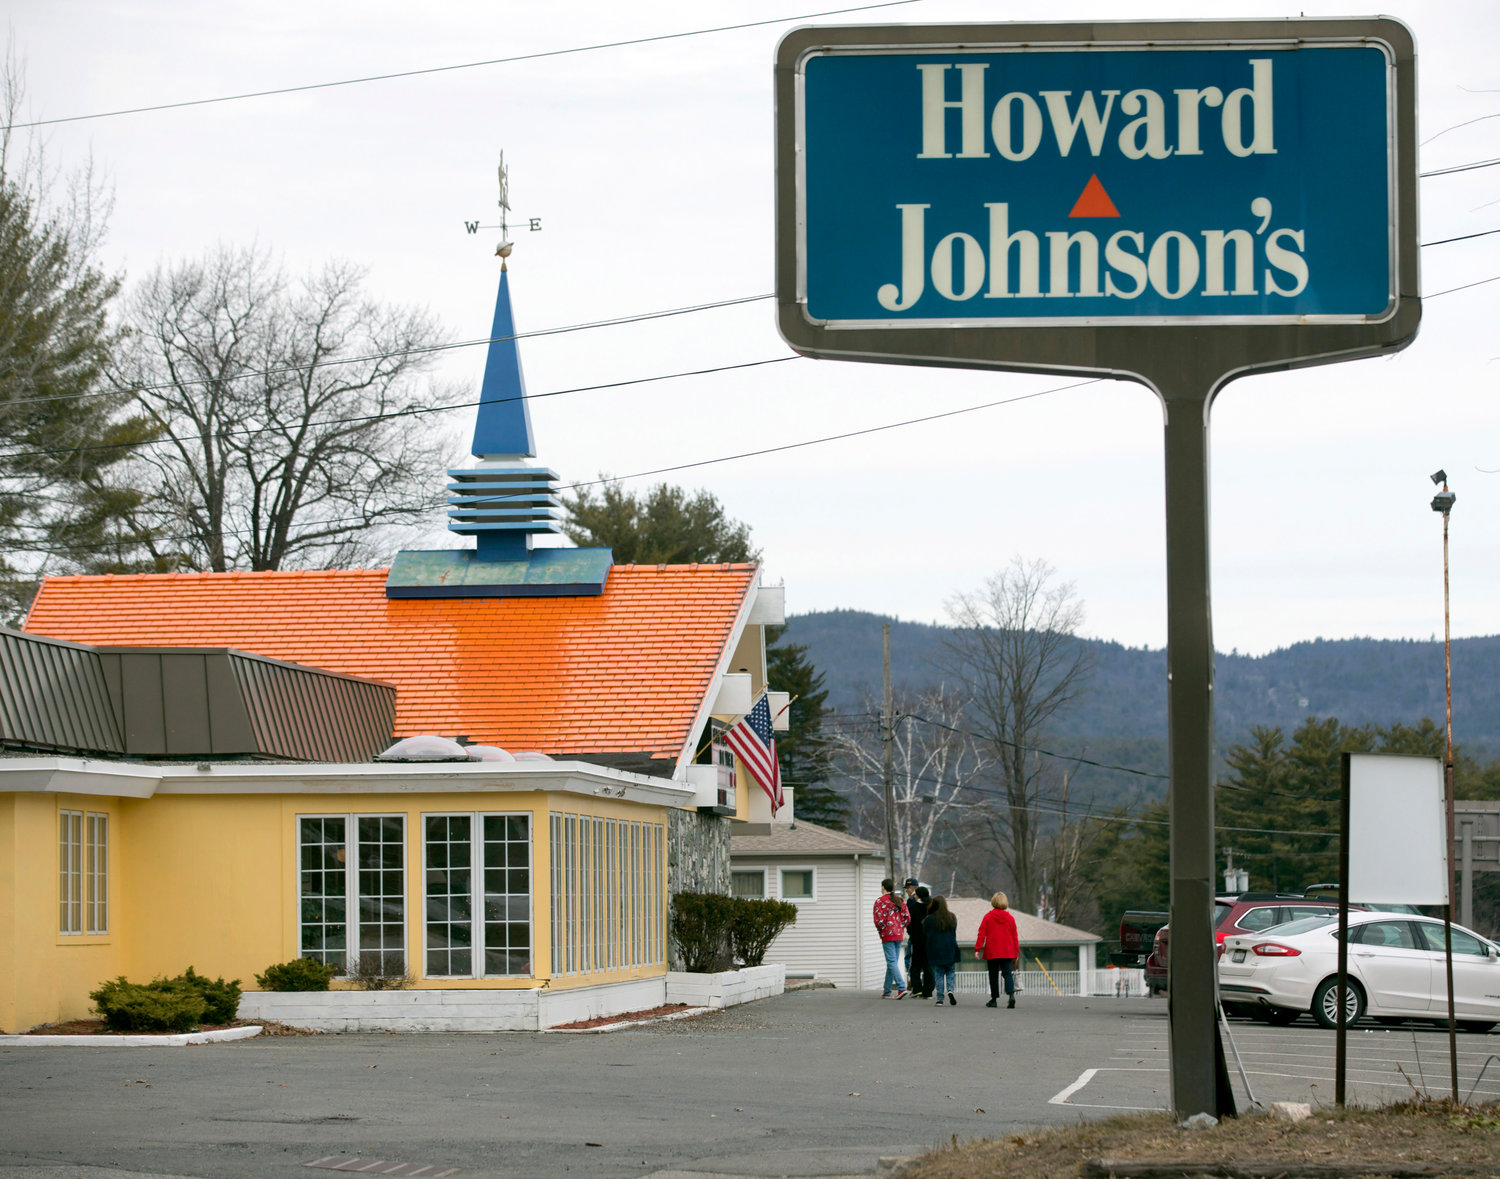 Customers walk into Howard Johnson's Restaurant in Lake George on April 8, 2015. The Howard Johnson's restaurant in this upstate New York resort village — the last of the once-pervasive eateries serving food under orange roofs with blue spires — is closed.